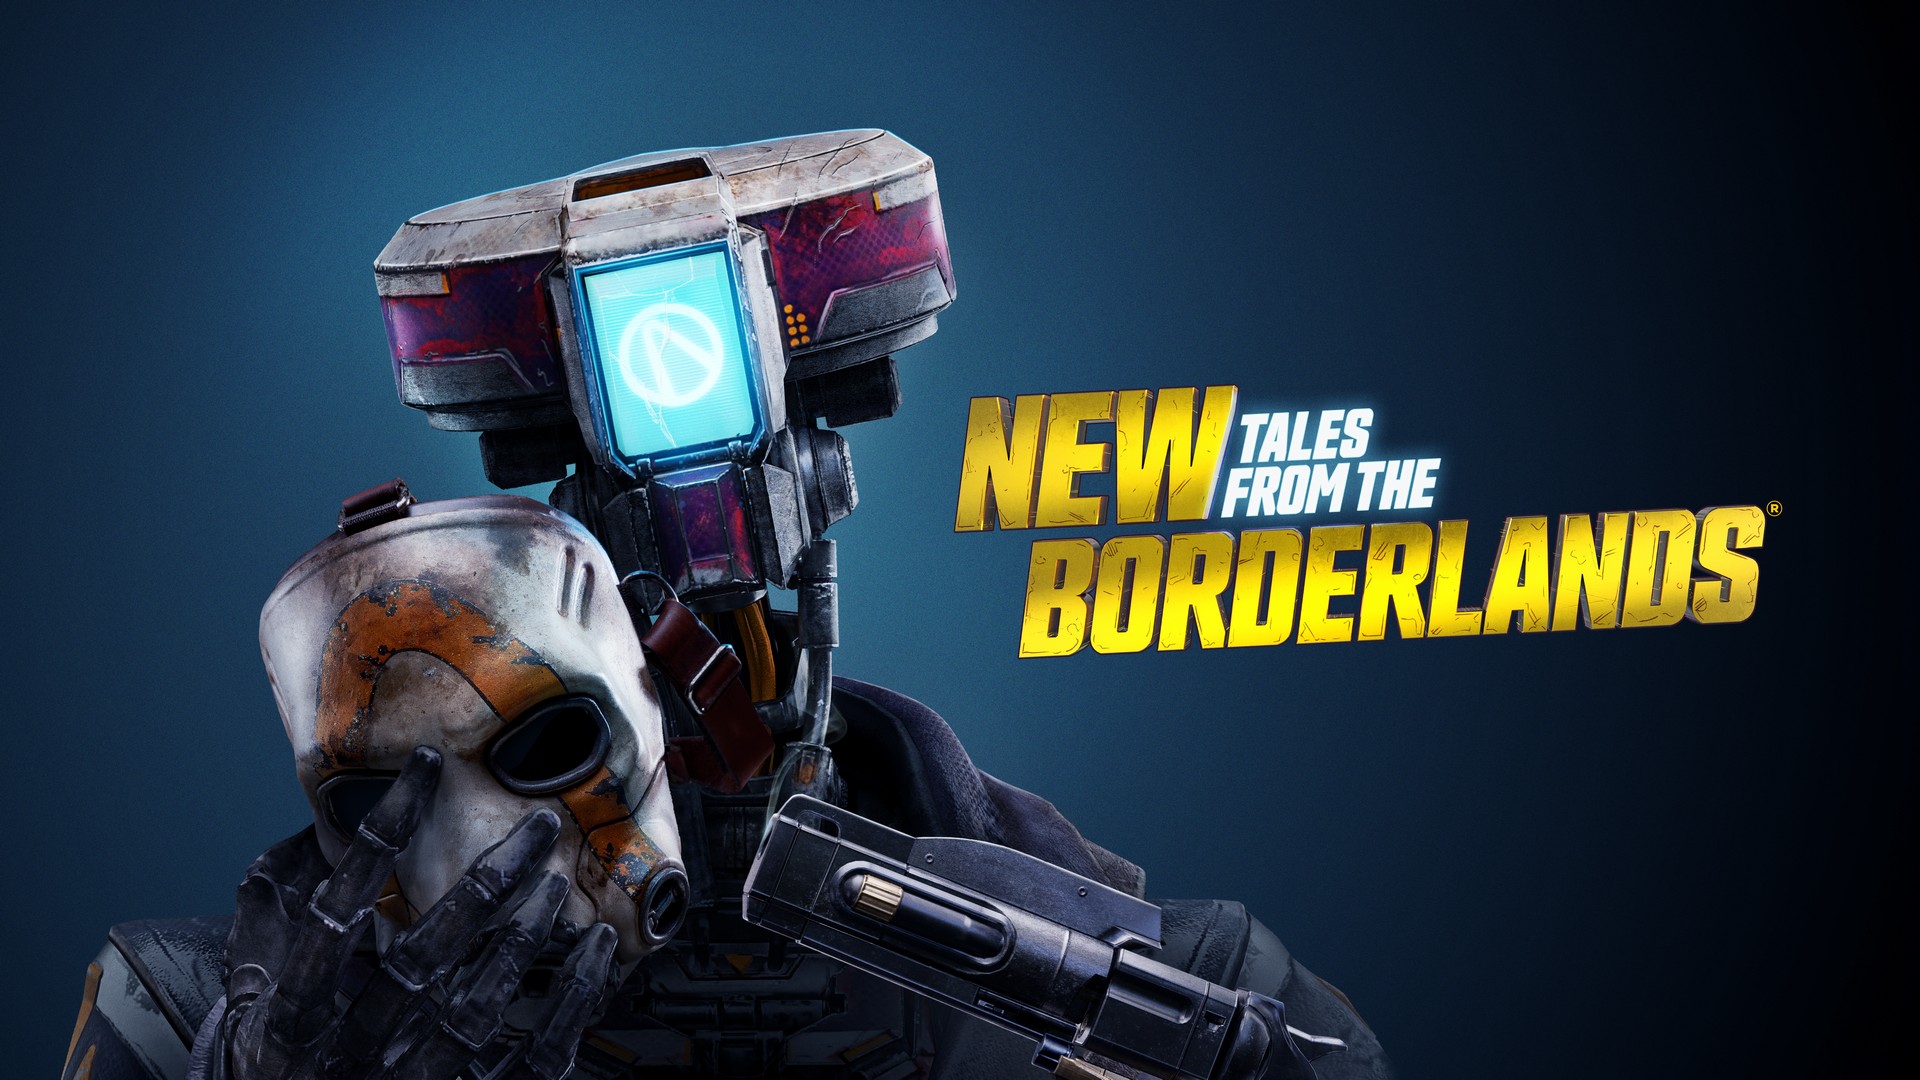 New Tales From The Borderlands – Now Available